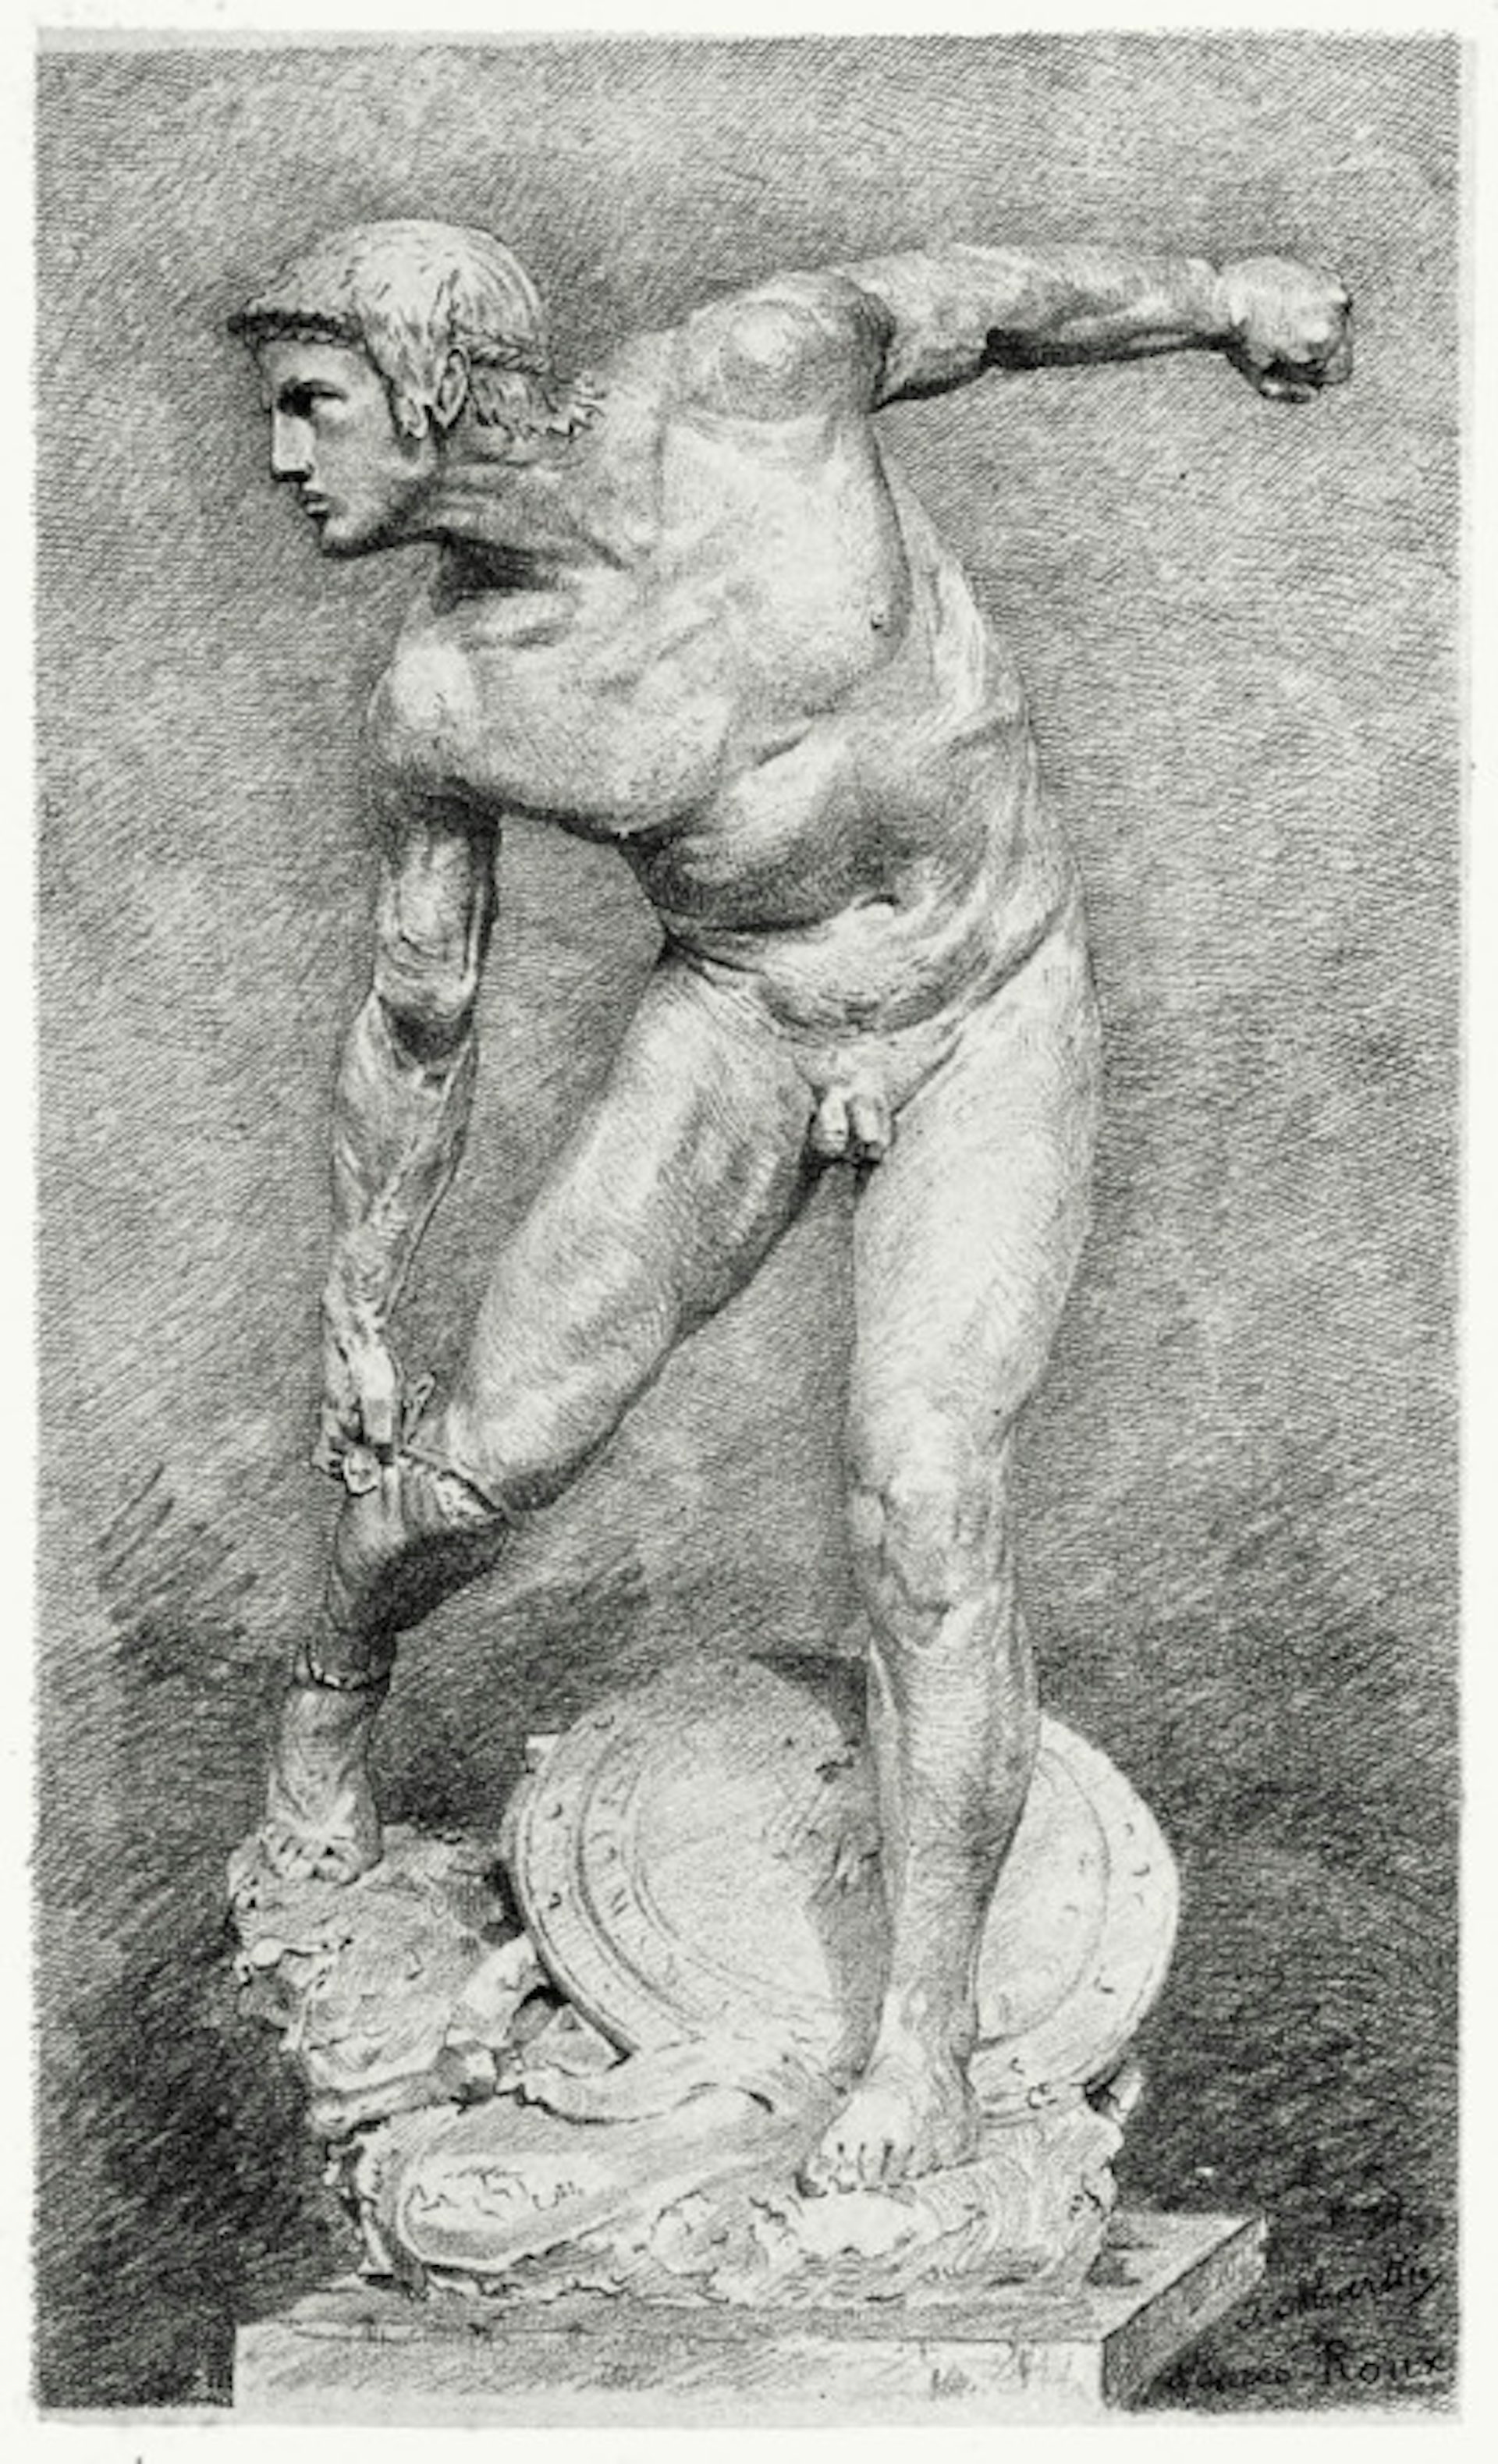 Achilles putting on the armor brought to him by his mother, the Nereid Thetis, by J. Martin after a sculpture by C. A. Roux